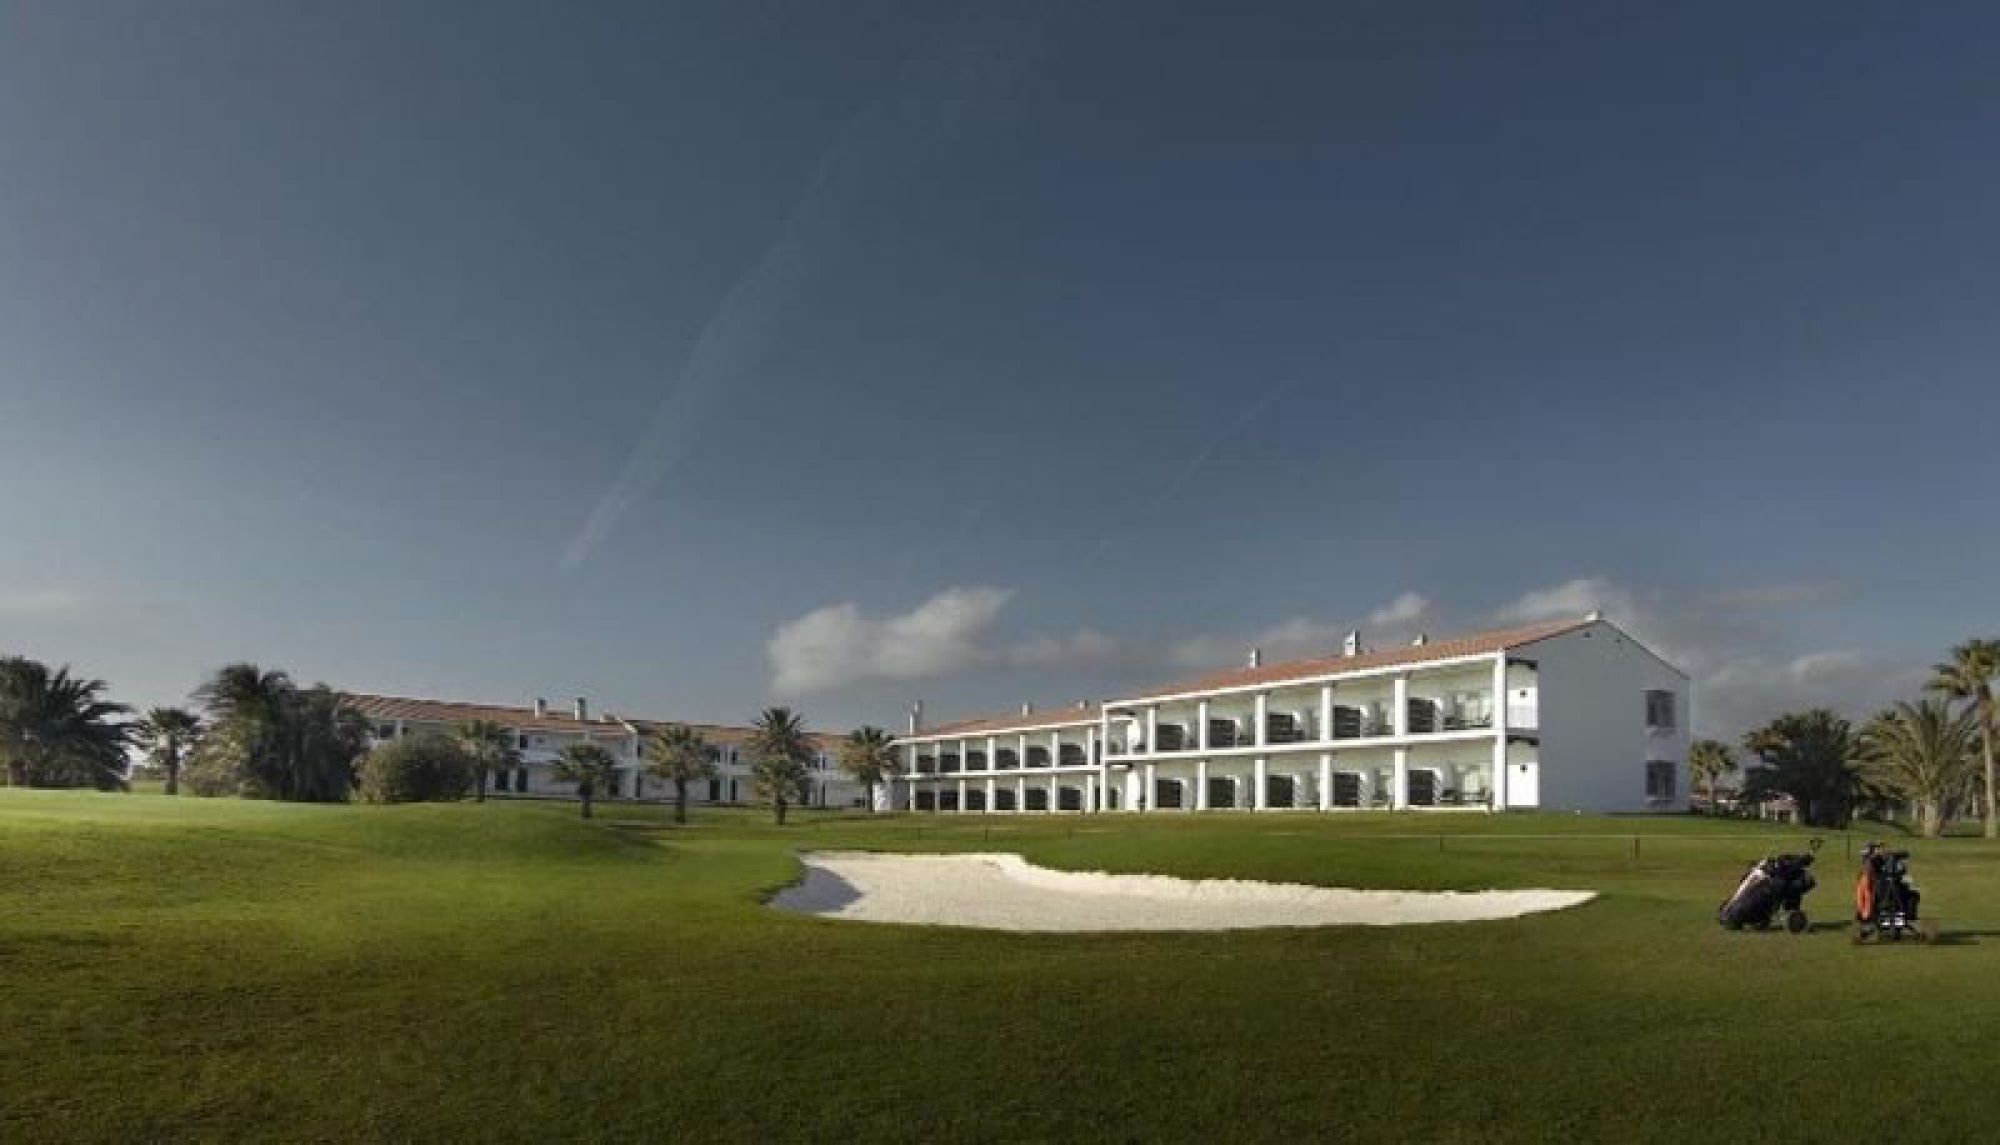 All The Parador de Malaga Golf's lovely golf course situated in dazzling Costa Del Sol.